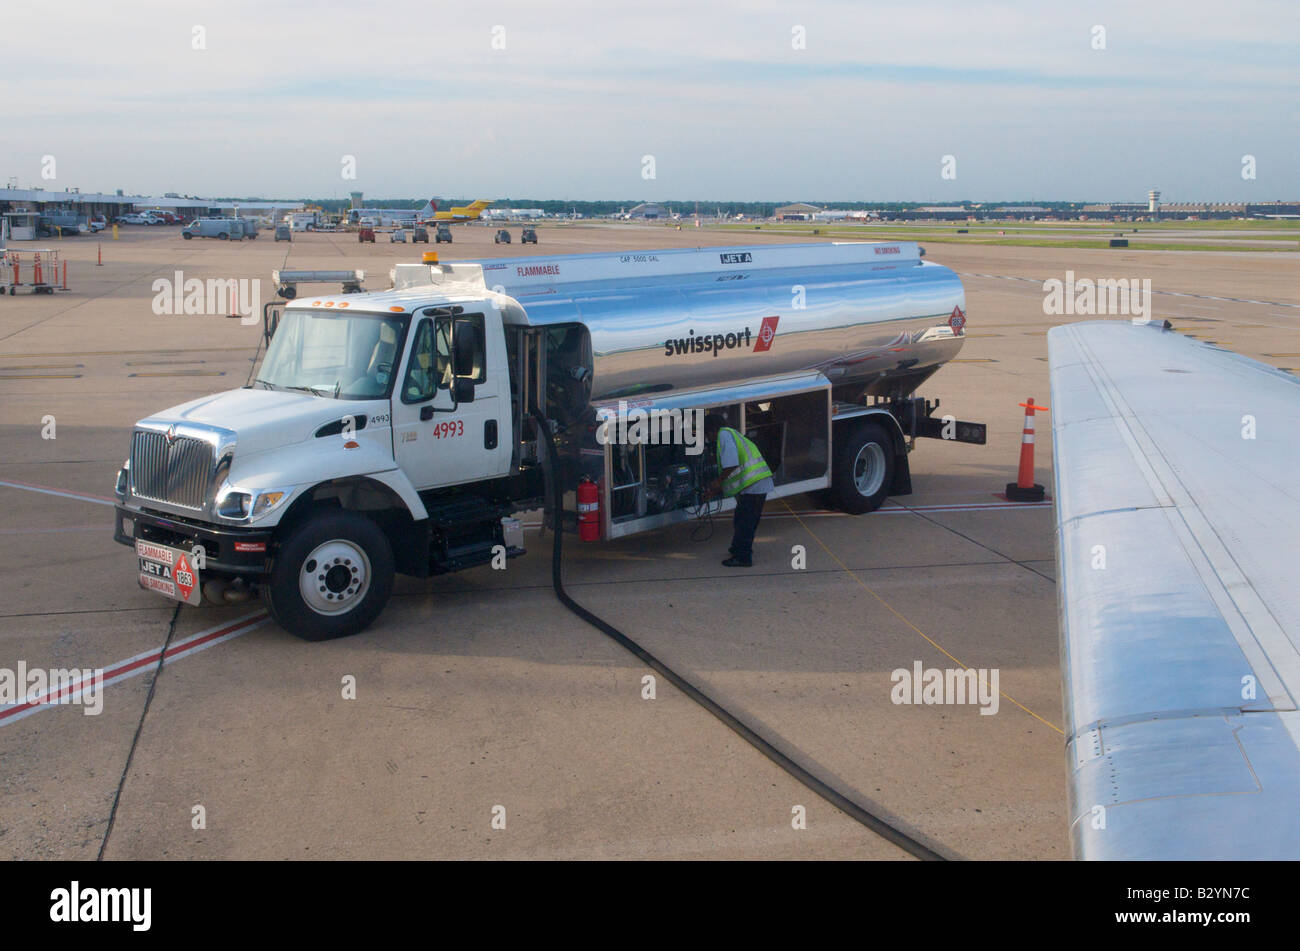 A service technician refuels an aircraft with jet fuel on the tarmac of Memphis International Airport, Memphis, Tennessee, USA. Stock Photo